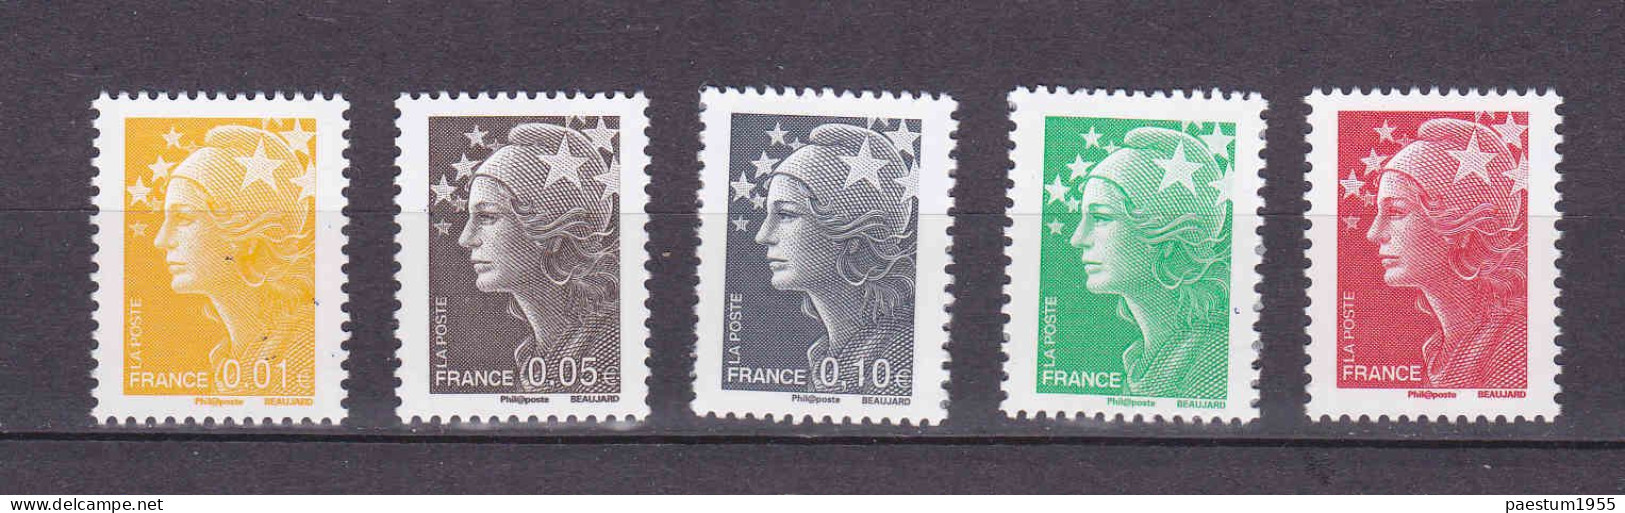 Série COMPLETE 13 Timbres Gommés Neuf** 2008 MNH Marianne De BEAUJARD Y&T 4226 à 4238 - 2008-2013 Marianne (Beaujard)